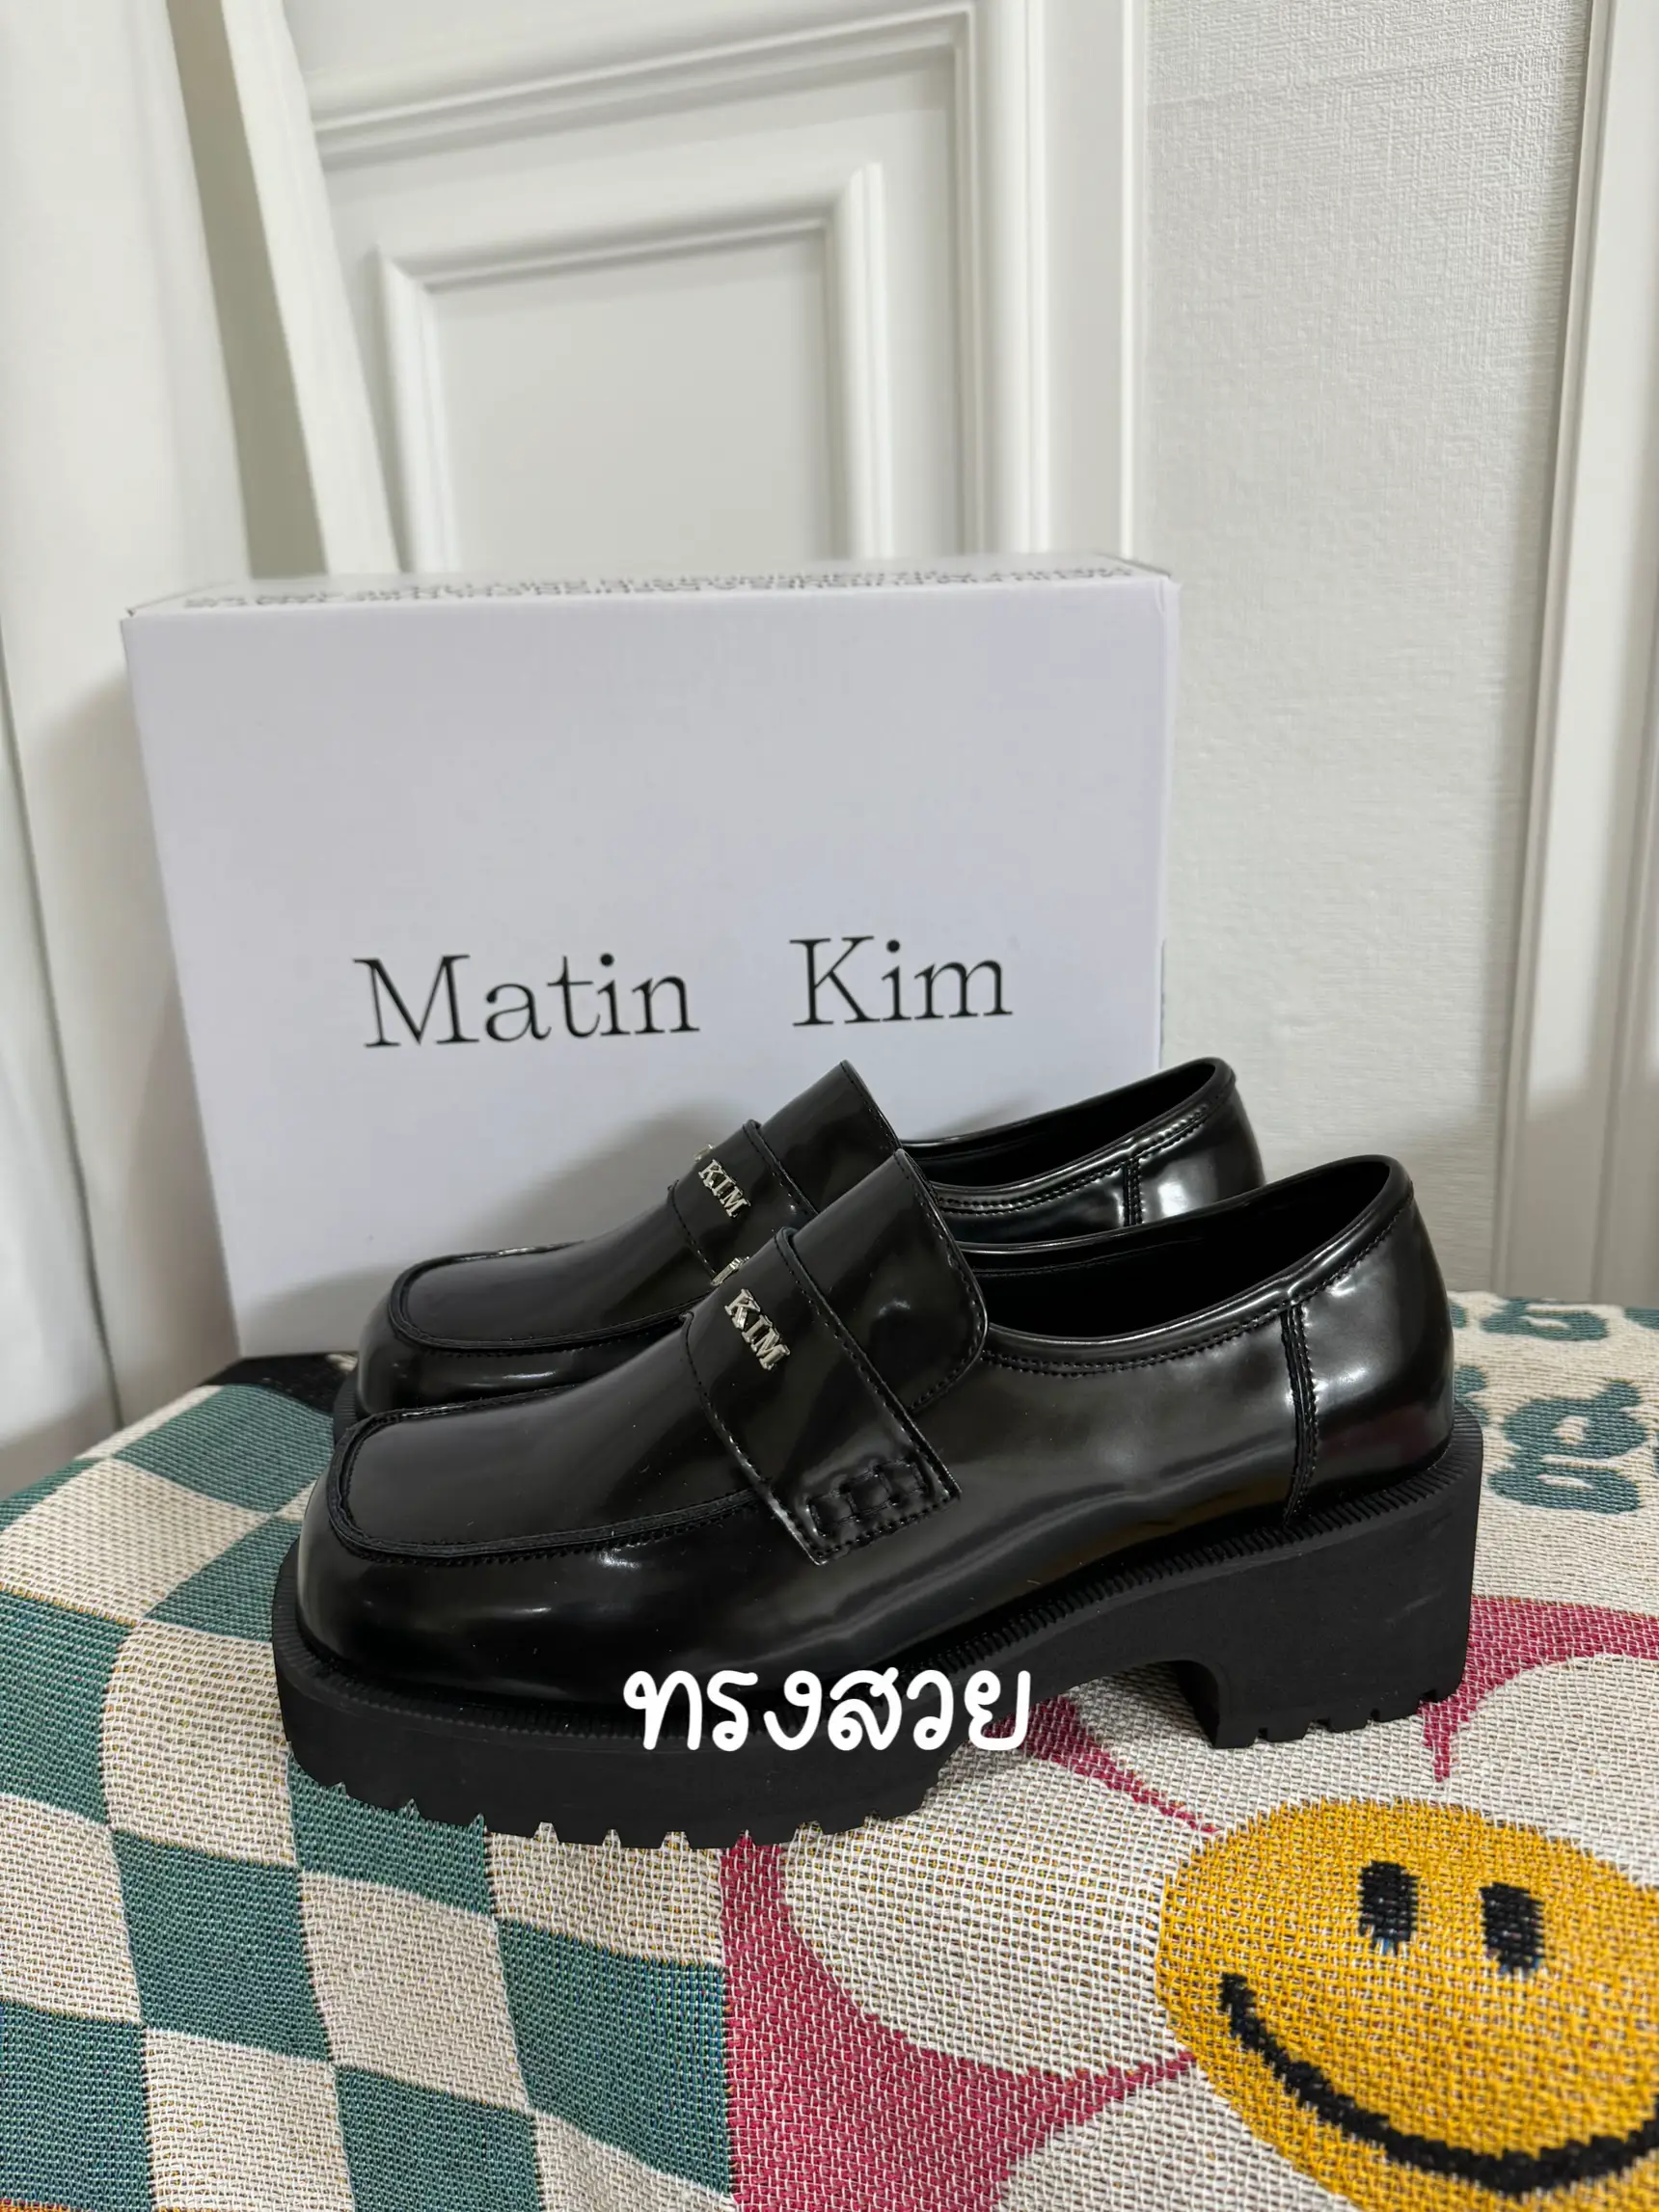 Matin Kim SQUARE LOAFER | Gallery posted by Suchada K. | Lemon8